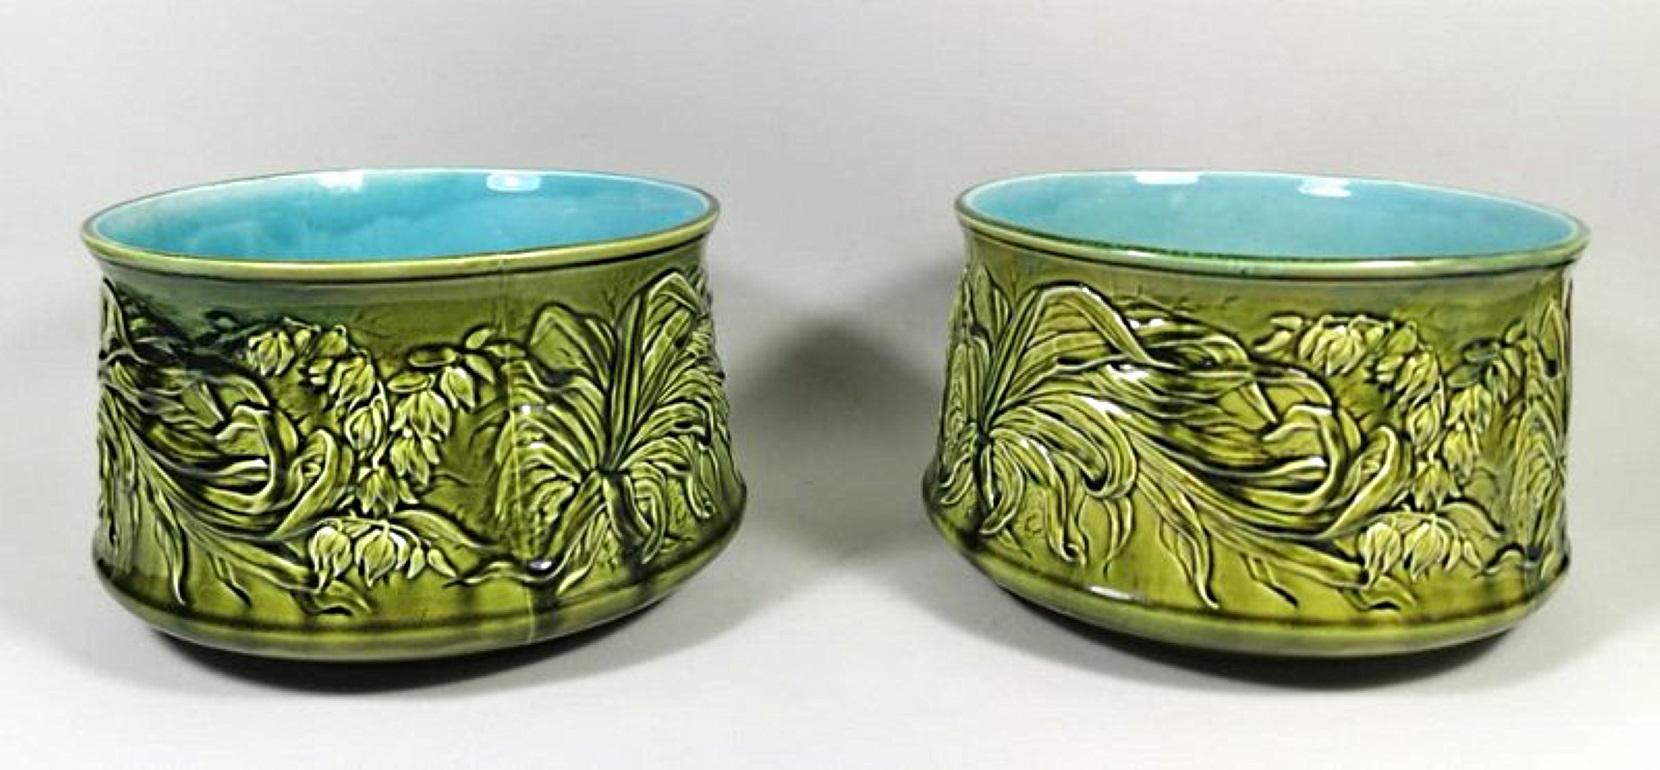 Pair of barbotine ceramic cachepots; they are magnificently enriched with elaborate floral decorations; the green colour shade is particularly well guessed and contrasts well with the celestial interior; they have a water drainage hole at the